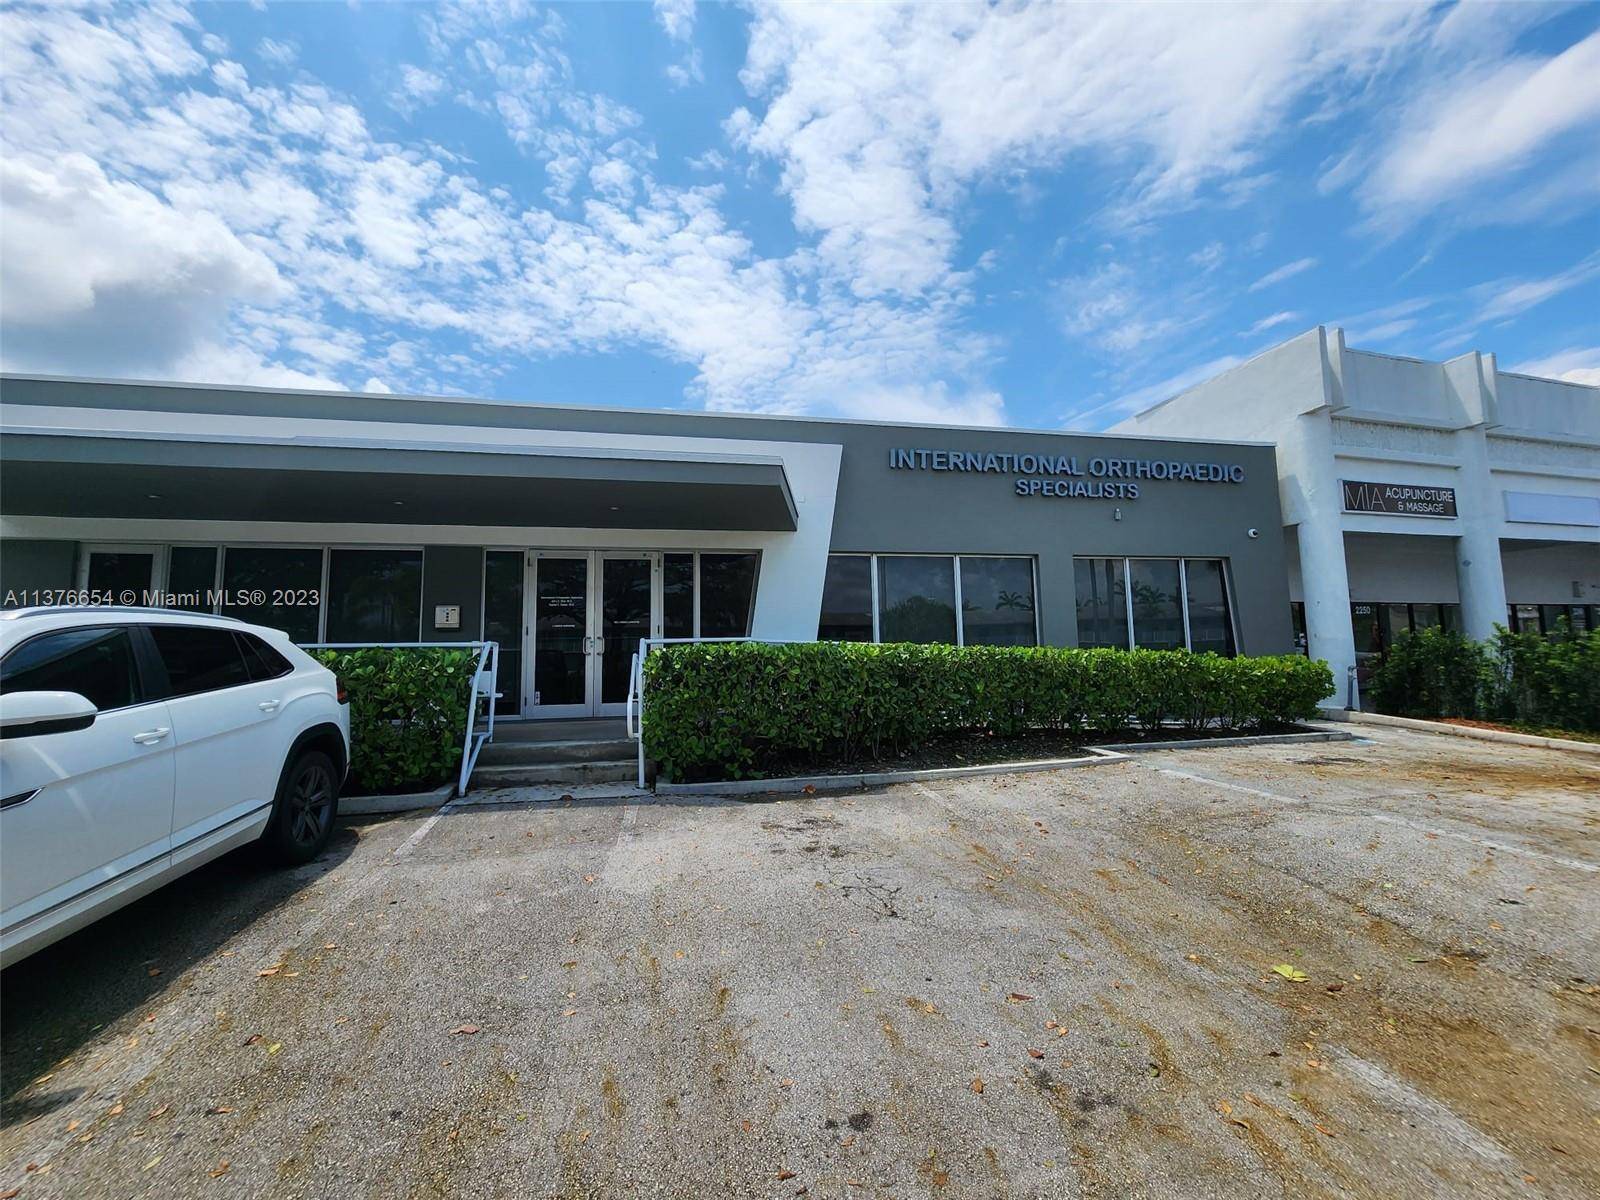 Welcome to this spectacular doctor's office located in the heart of North Miami.